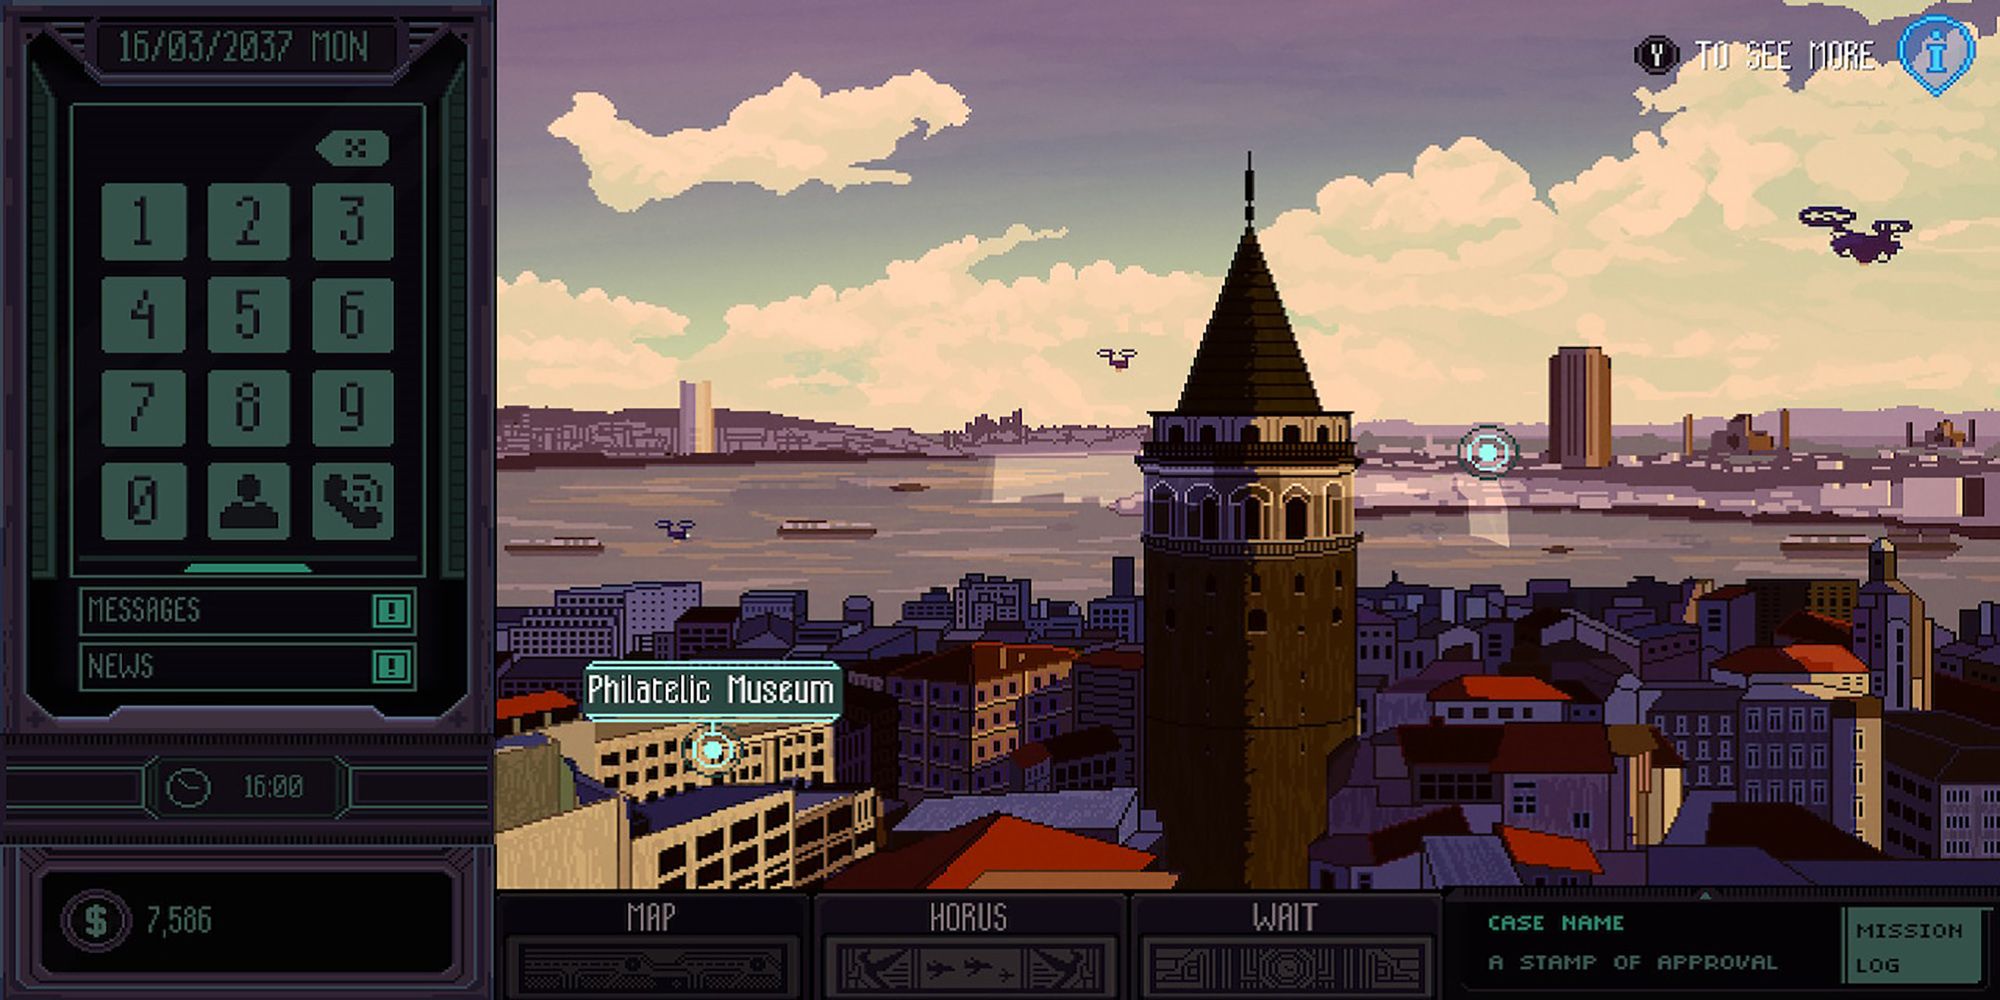 Drones flood the sky in Instanbul in Chinatown Detective Agency.